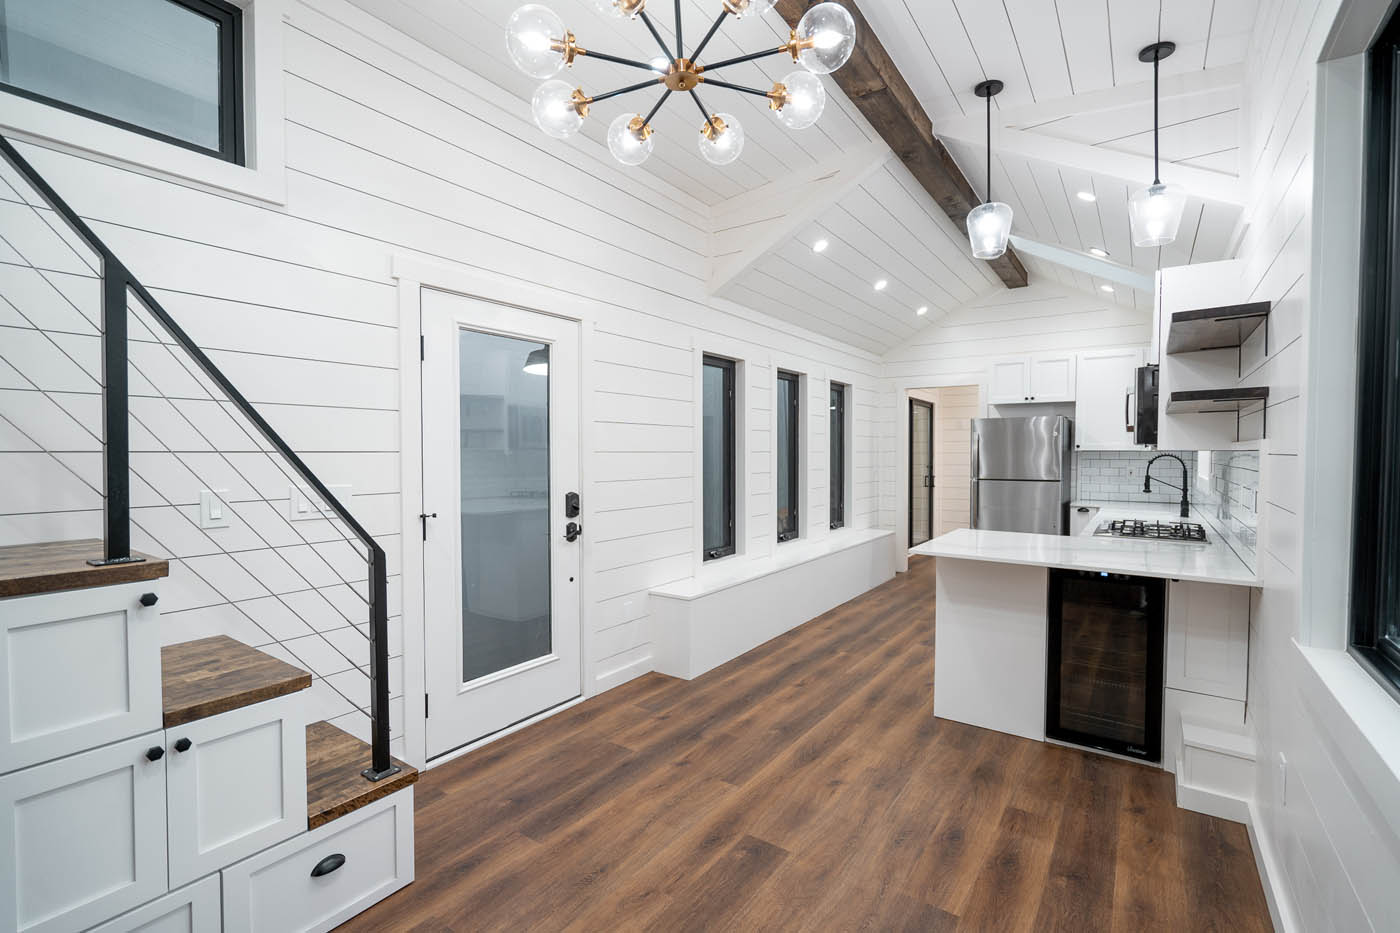 A modern home with dark floors and white kitchen cabinets, provided by one of the best tiny house companies.